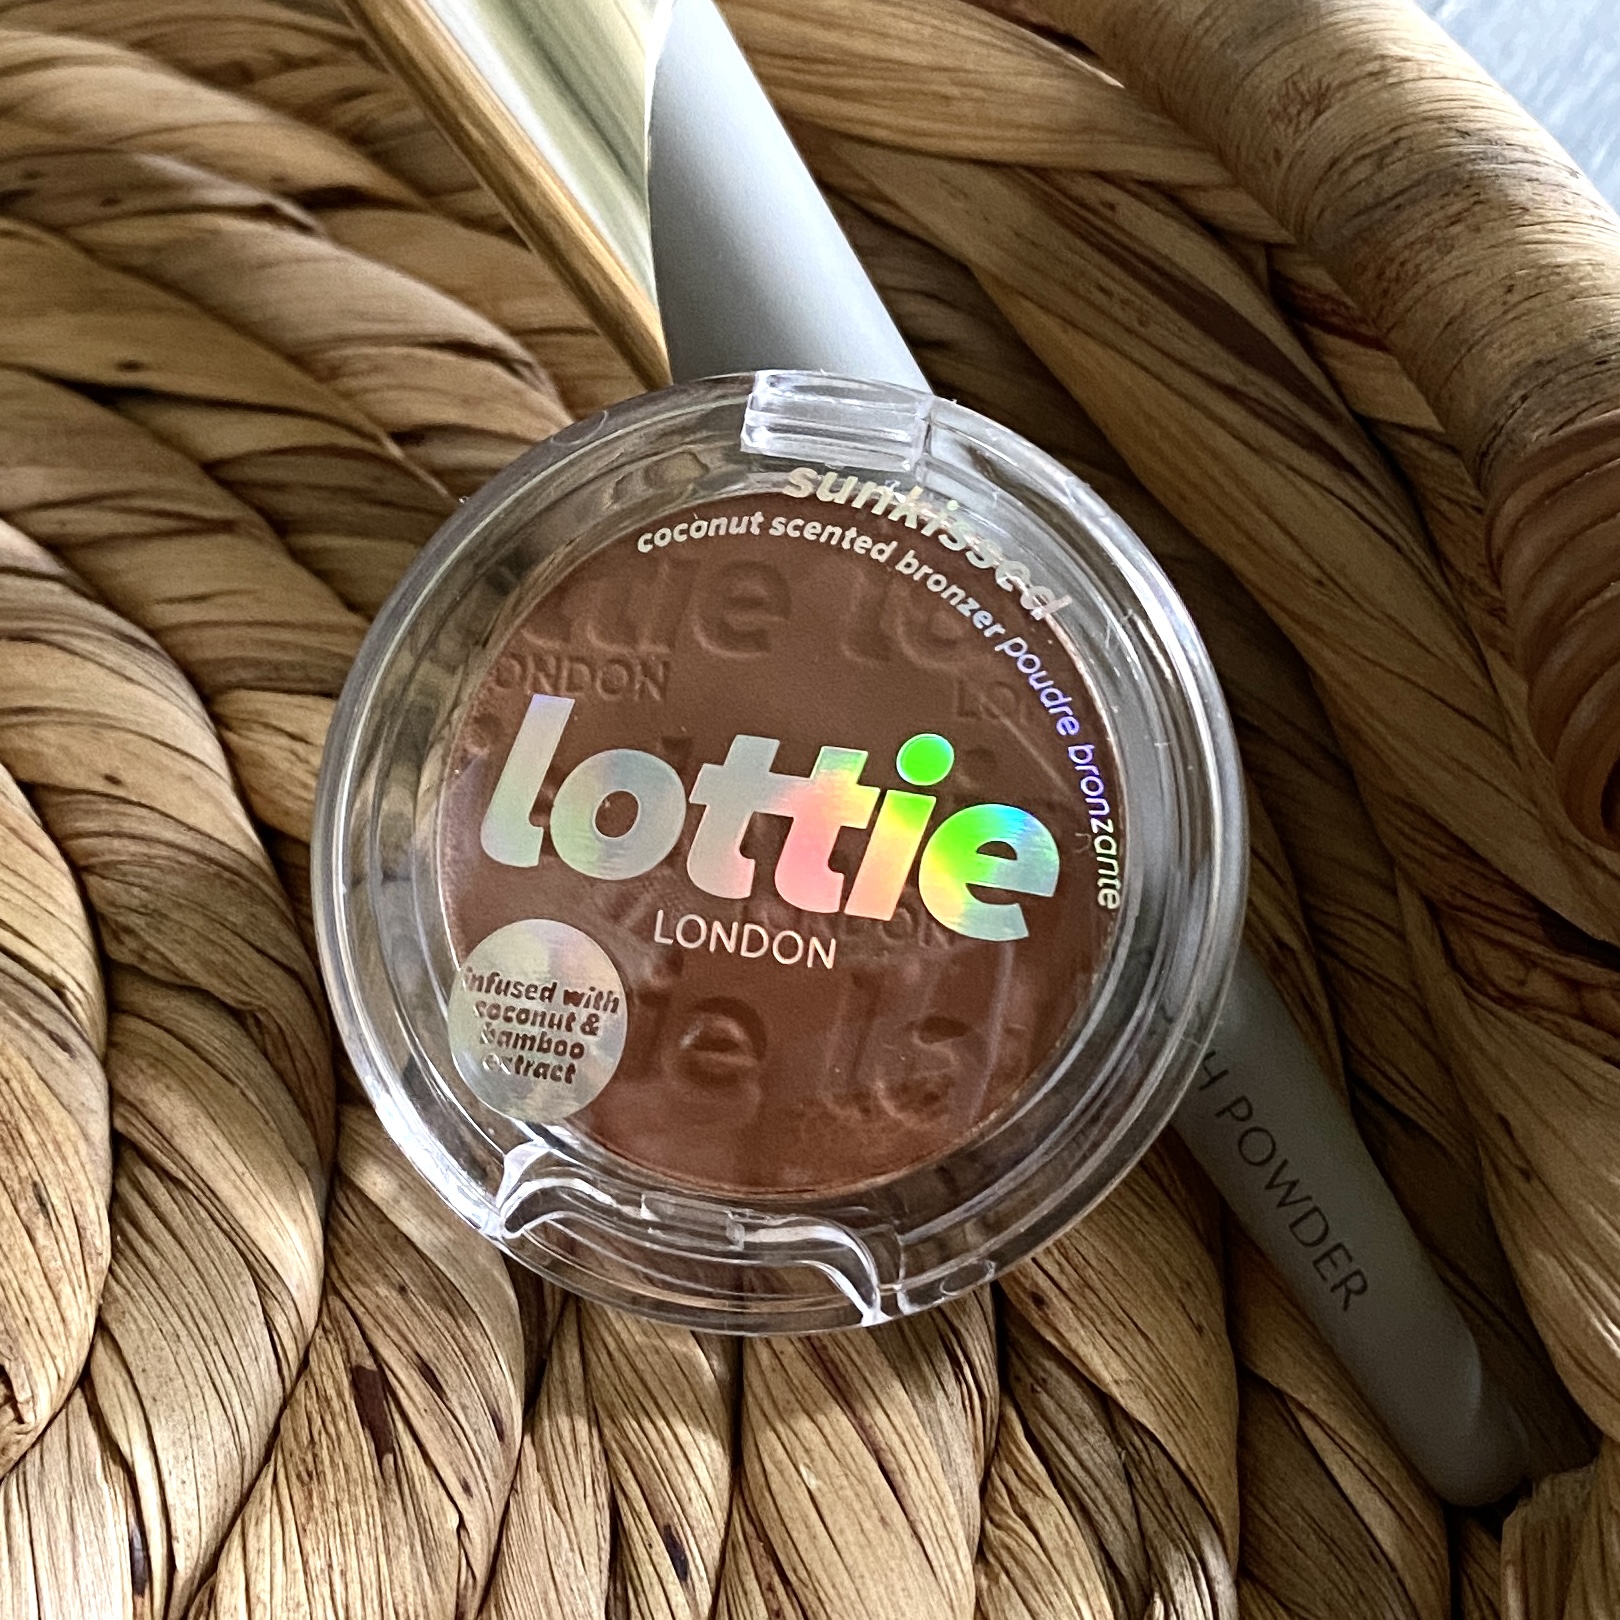 Lottie London Sunkissed Coconut Scented Bronzer in Suncatcher for Ipsy Glam Bag August 2021